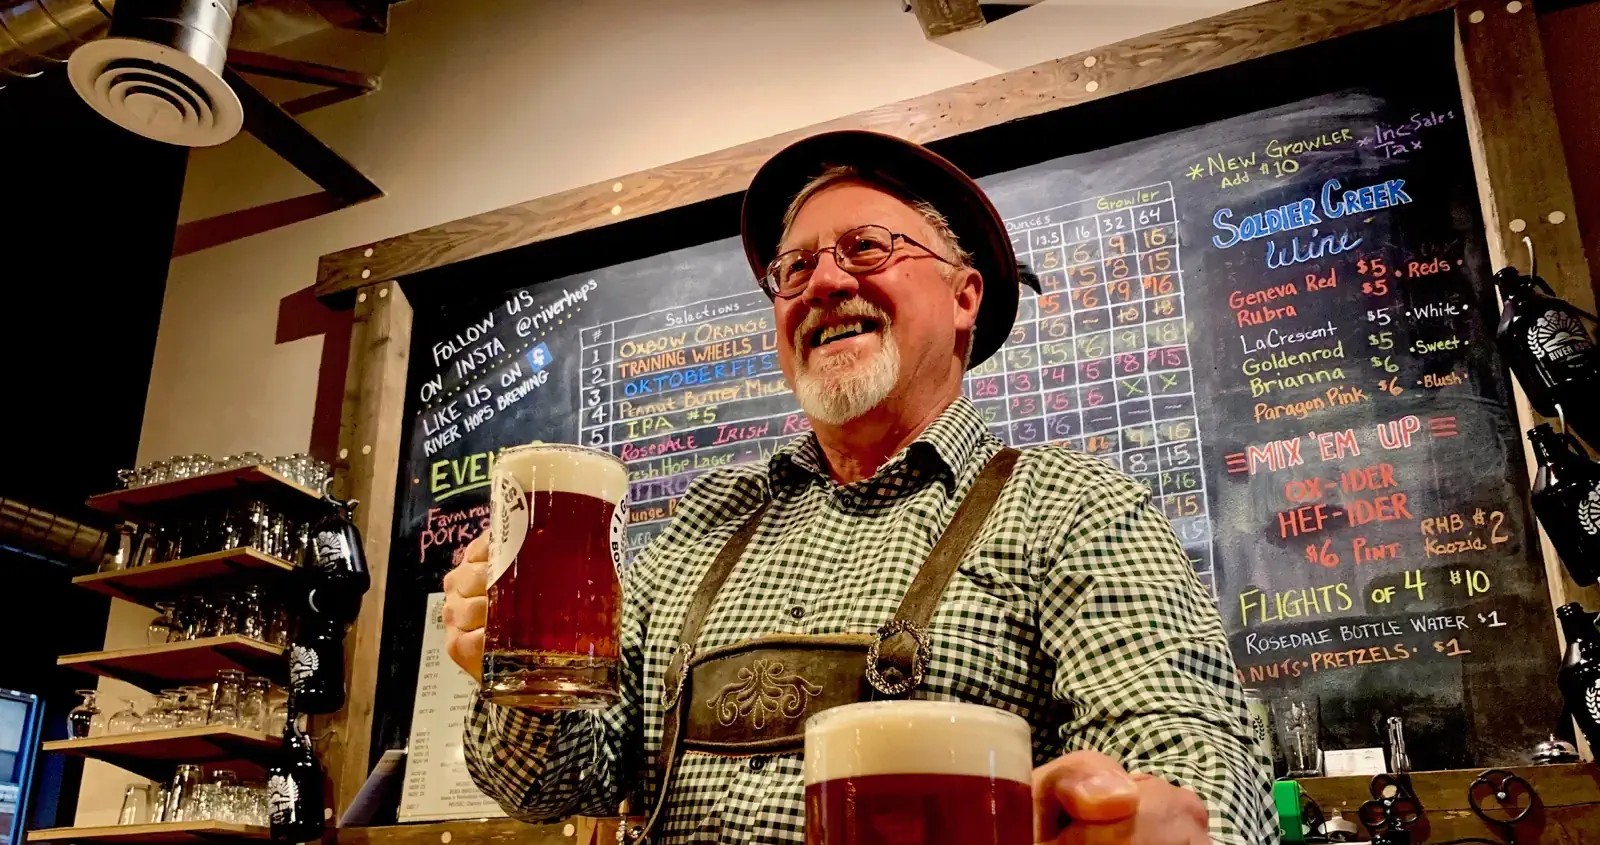 Older man with white beard serving pints of beer.